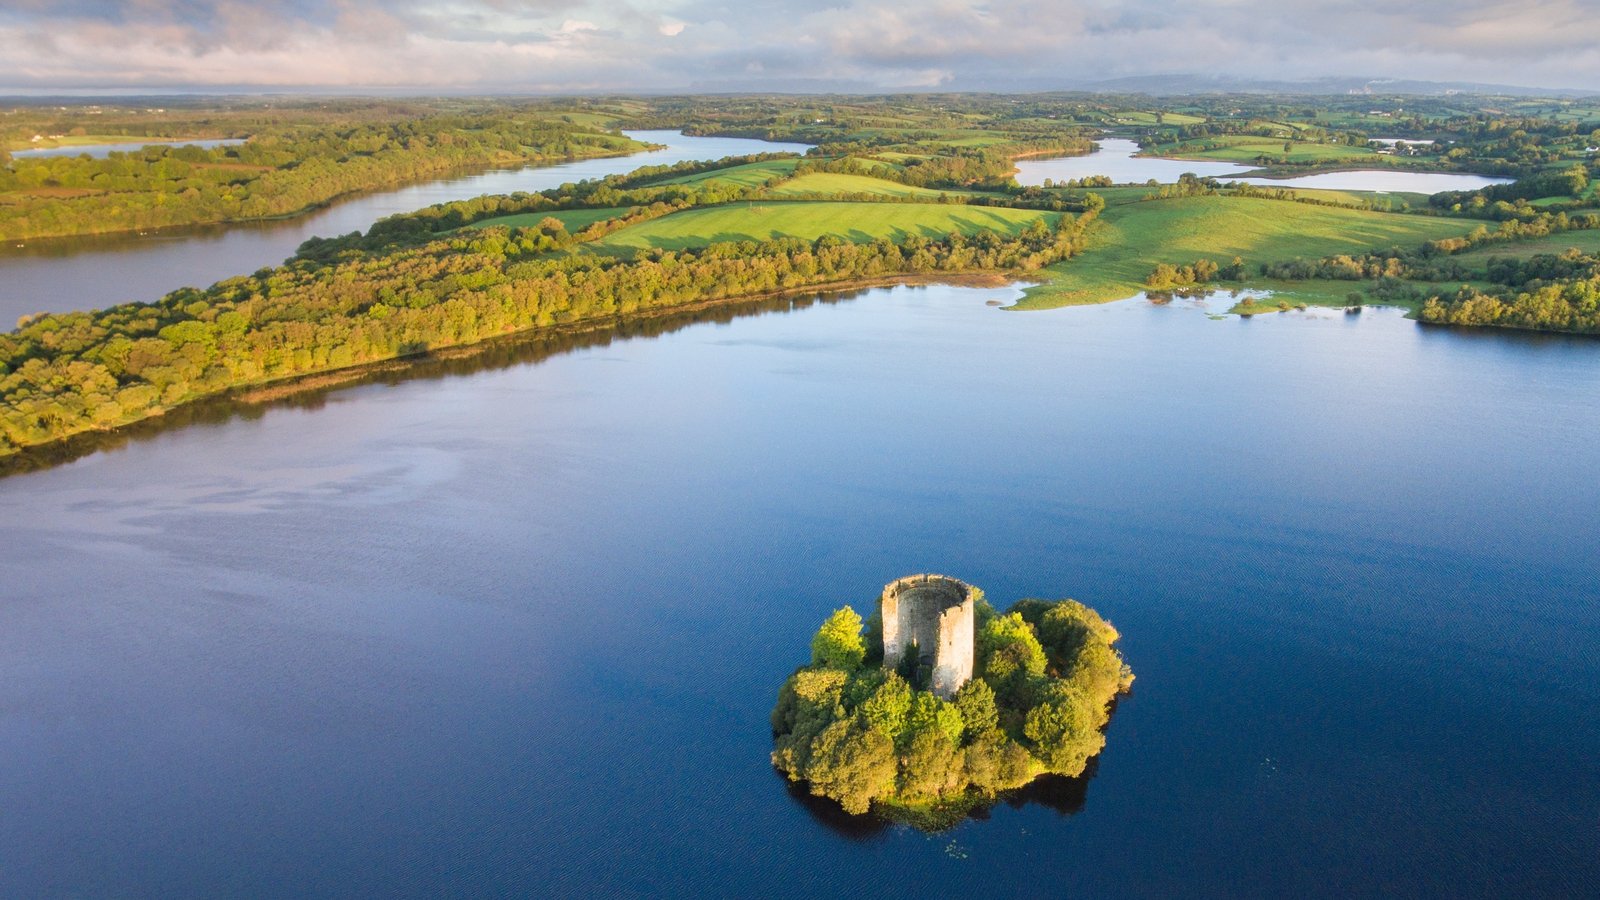 What is Cavan Ireland known for?